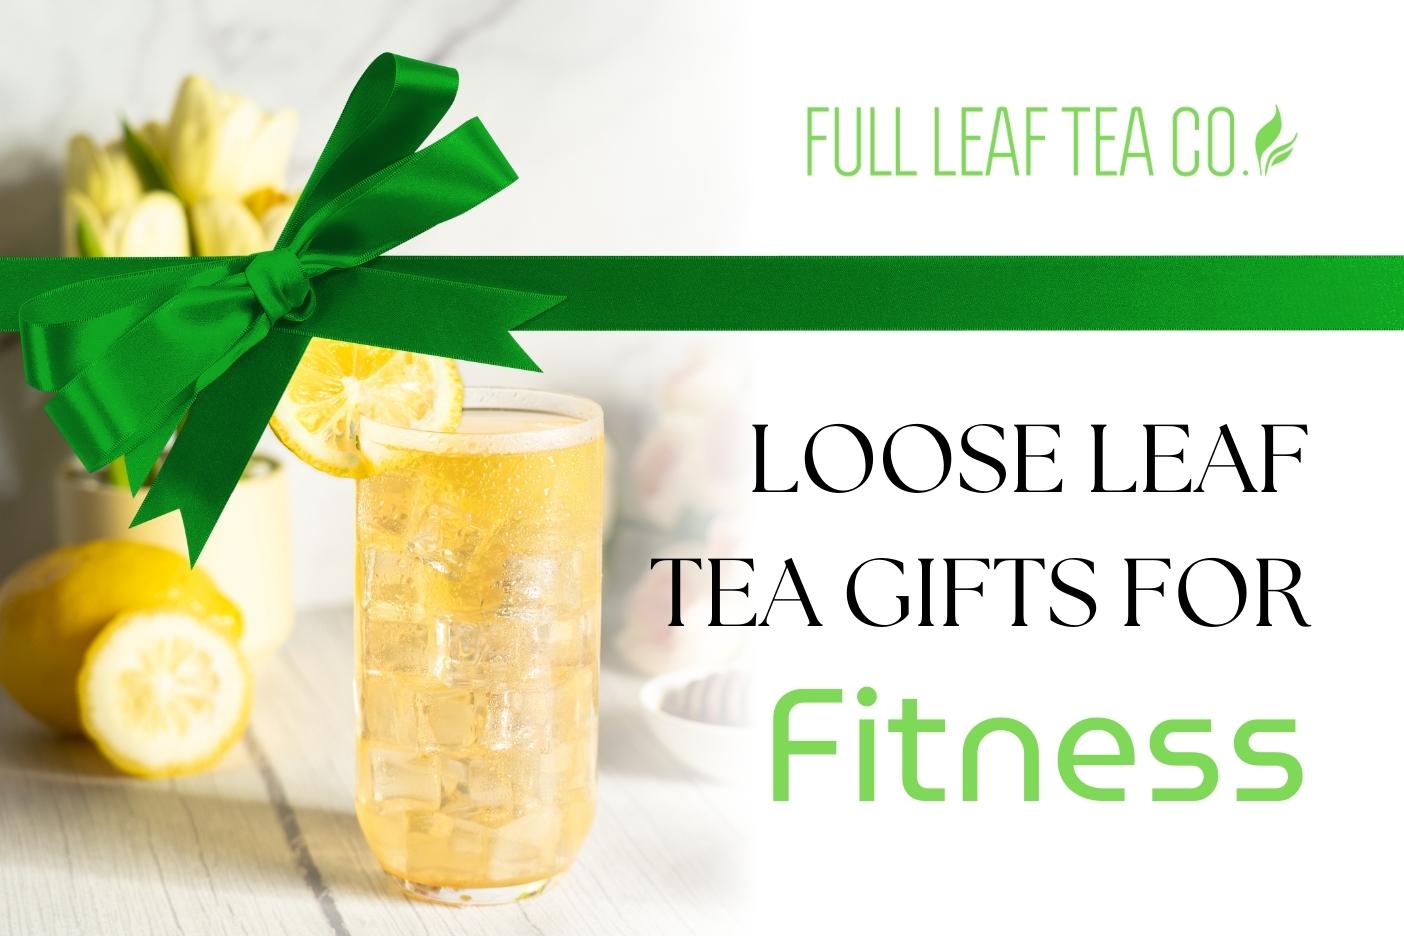 Loose Leaf Tea Gifts for the Fitness Lover - Full Leaf Tea Company